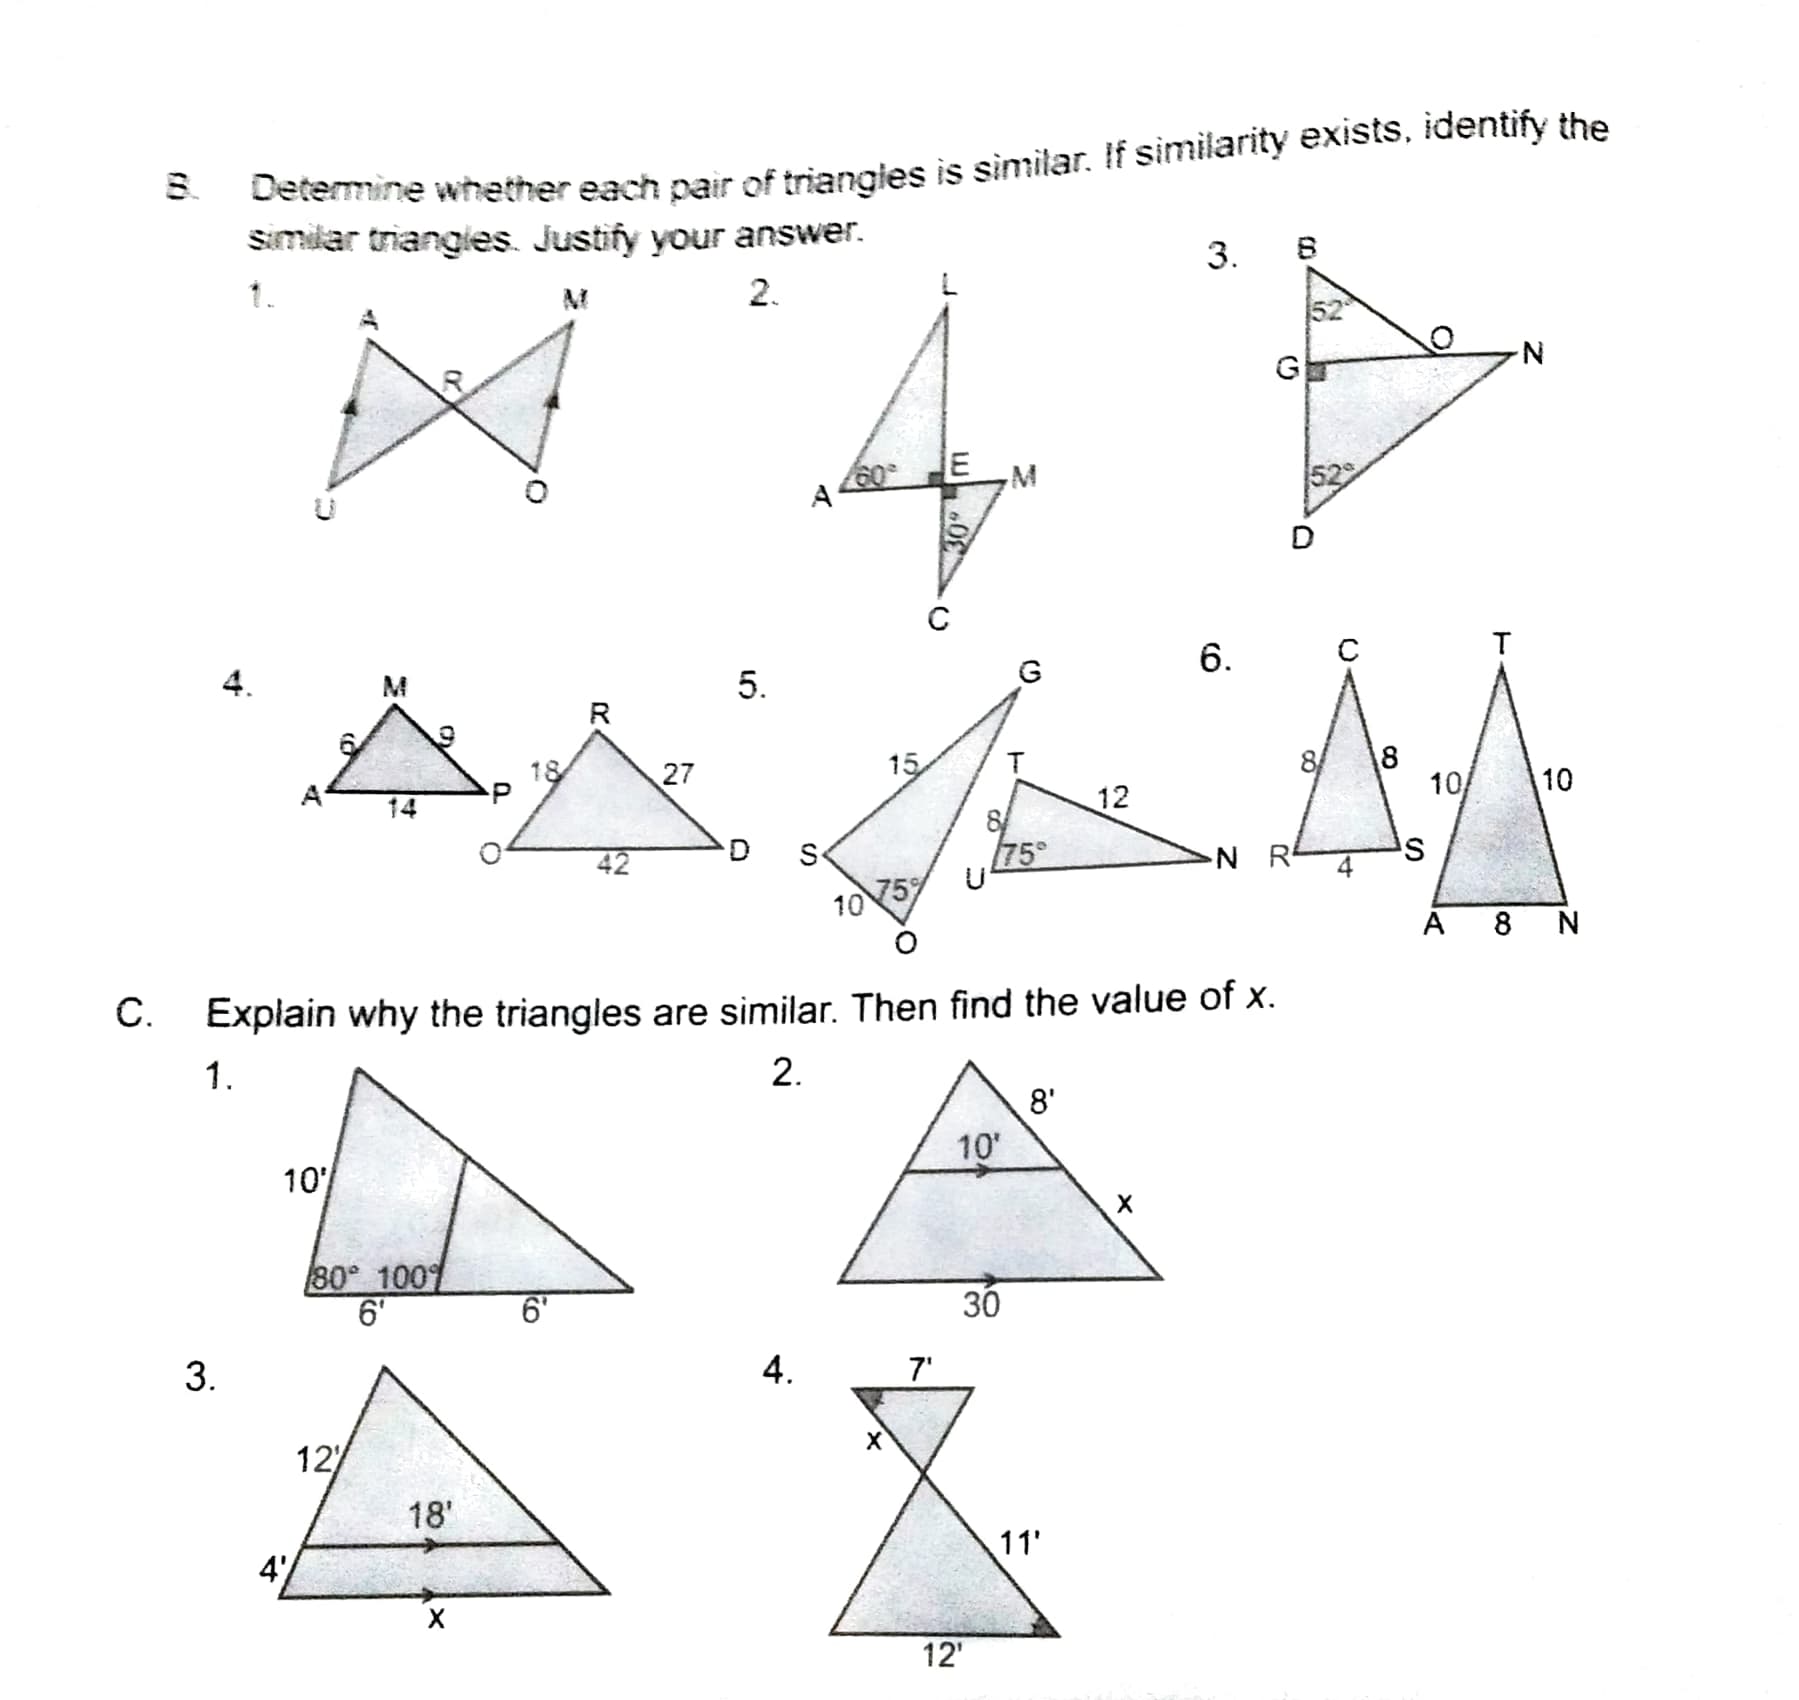 30 m
Lelemine whether each pair of triangles is similar. If similarity exists, identify the
Similar triangies. Justify your answer.
8.
3.
M
2.
N-
G
M
A
6.
4.
M
5.
G
R
27
15
8/
A
12
10/
10
14
8
75°
D
S
N R
10
75%
A 8 N
C.
Explain why the triangles are similar. Then find the value of x.
1.
2.
8'
10'
10
80 100%
6'
6'
30
3.
4.
7'
12)
18'
11'
4'
12'
